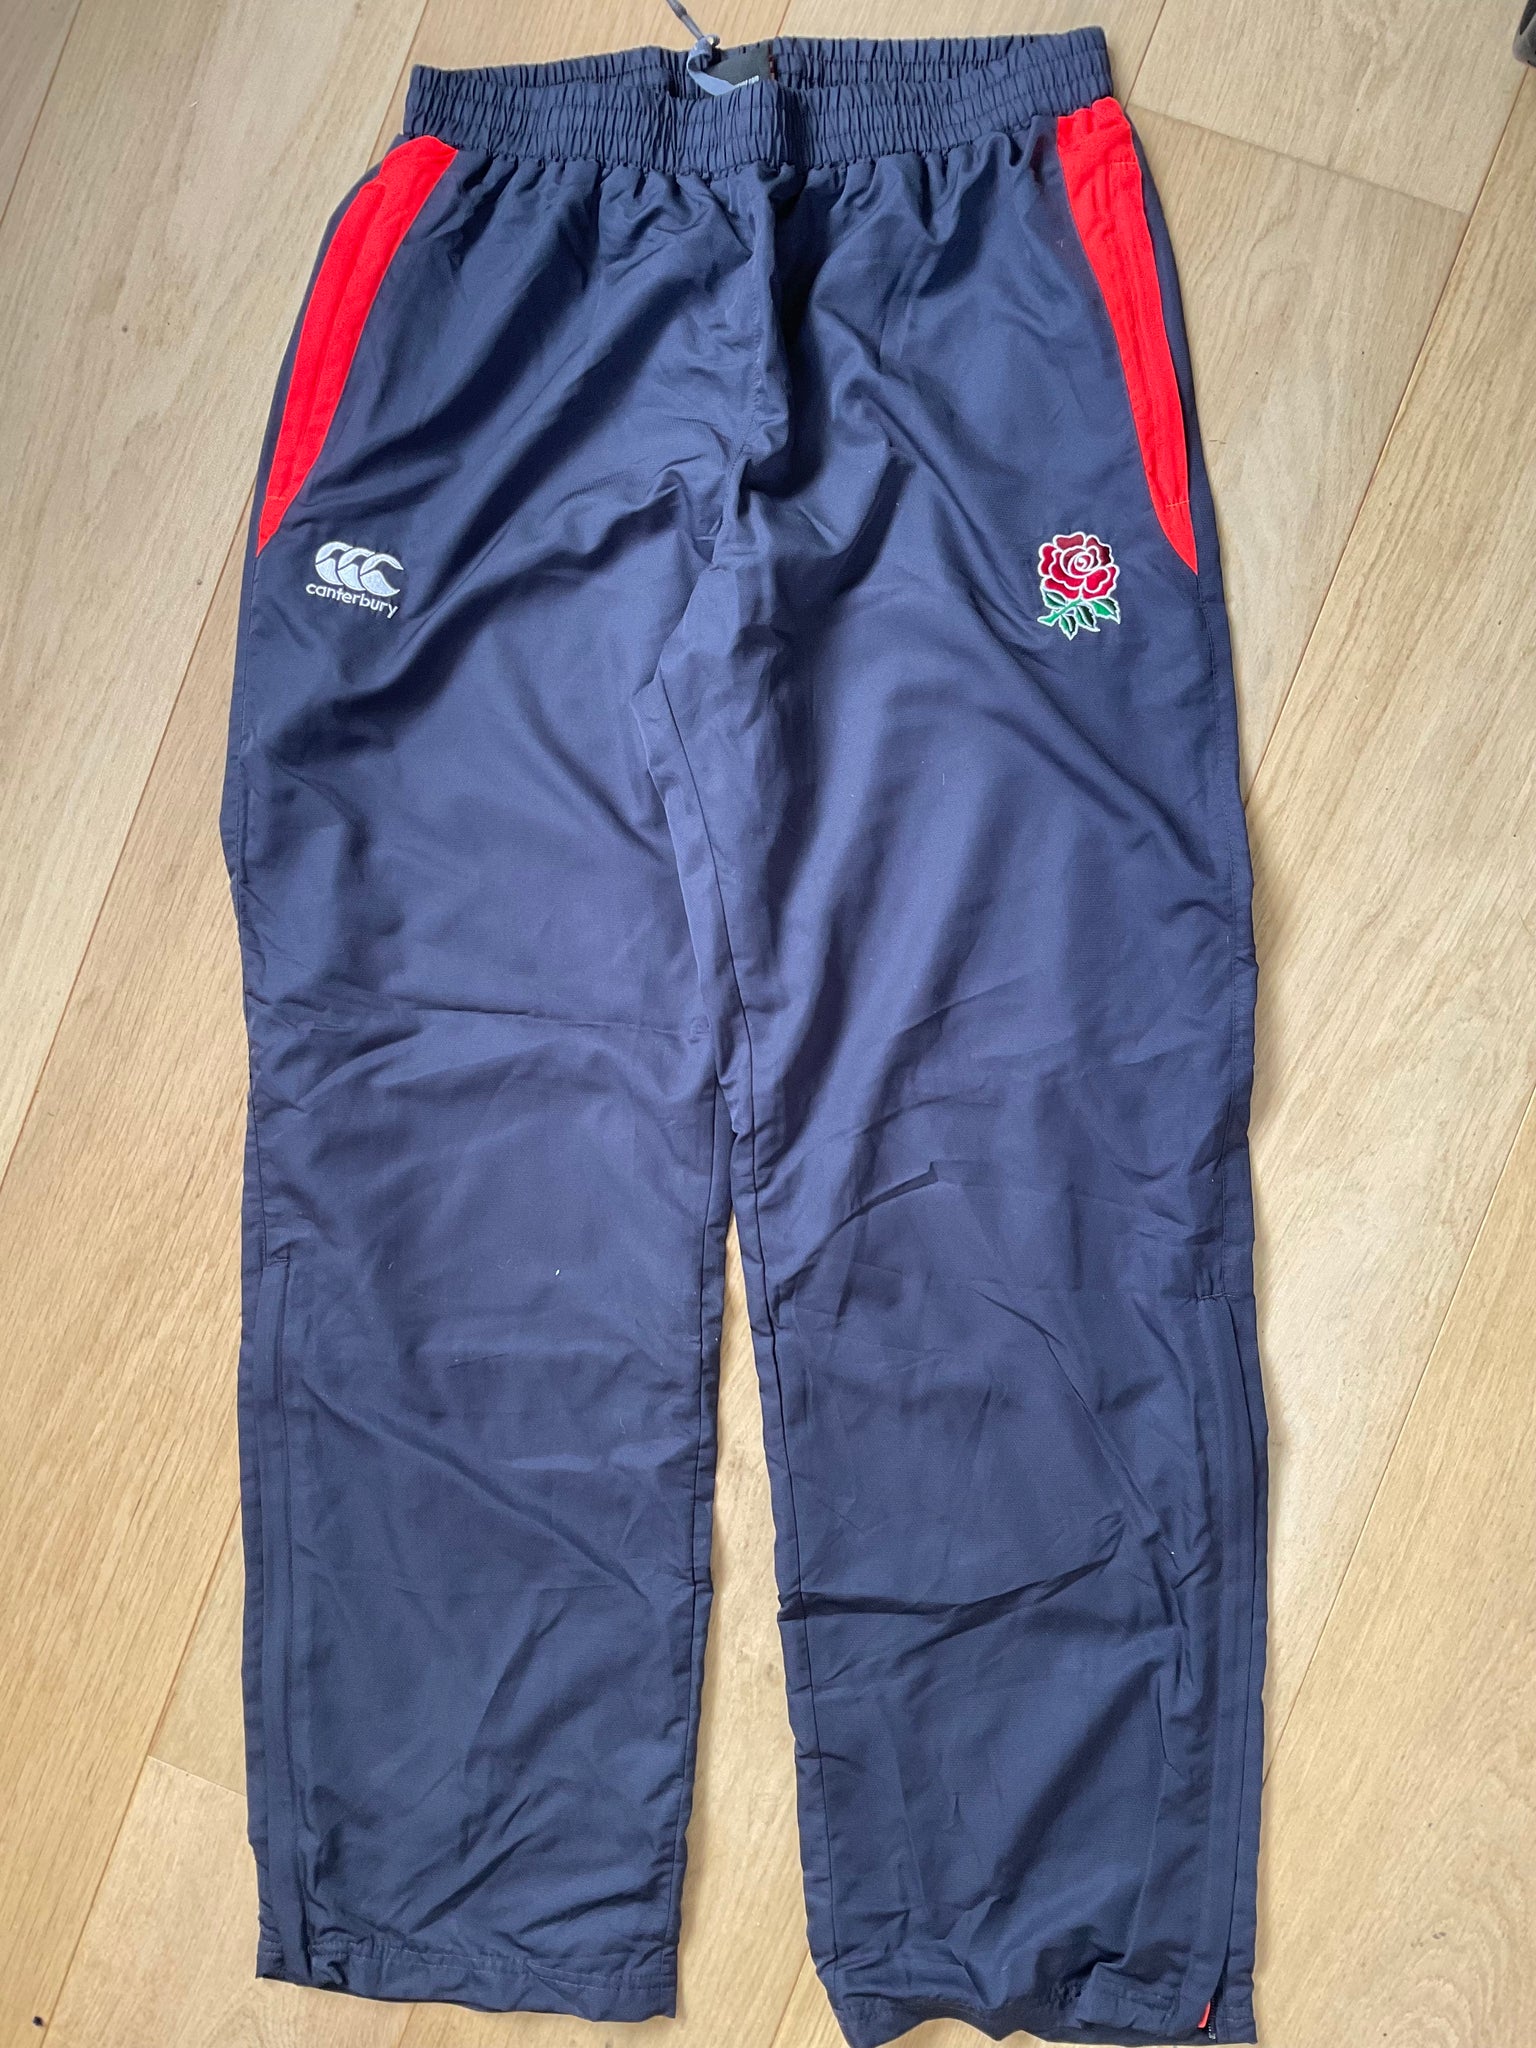 Tom Curry - England Rugby Tracksuit Bottoms [Anthracite & Orange]